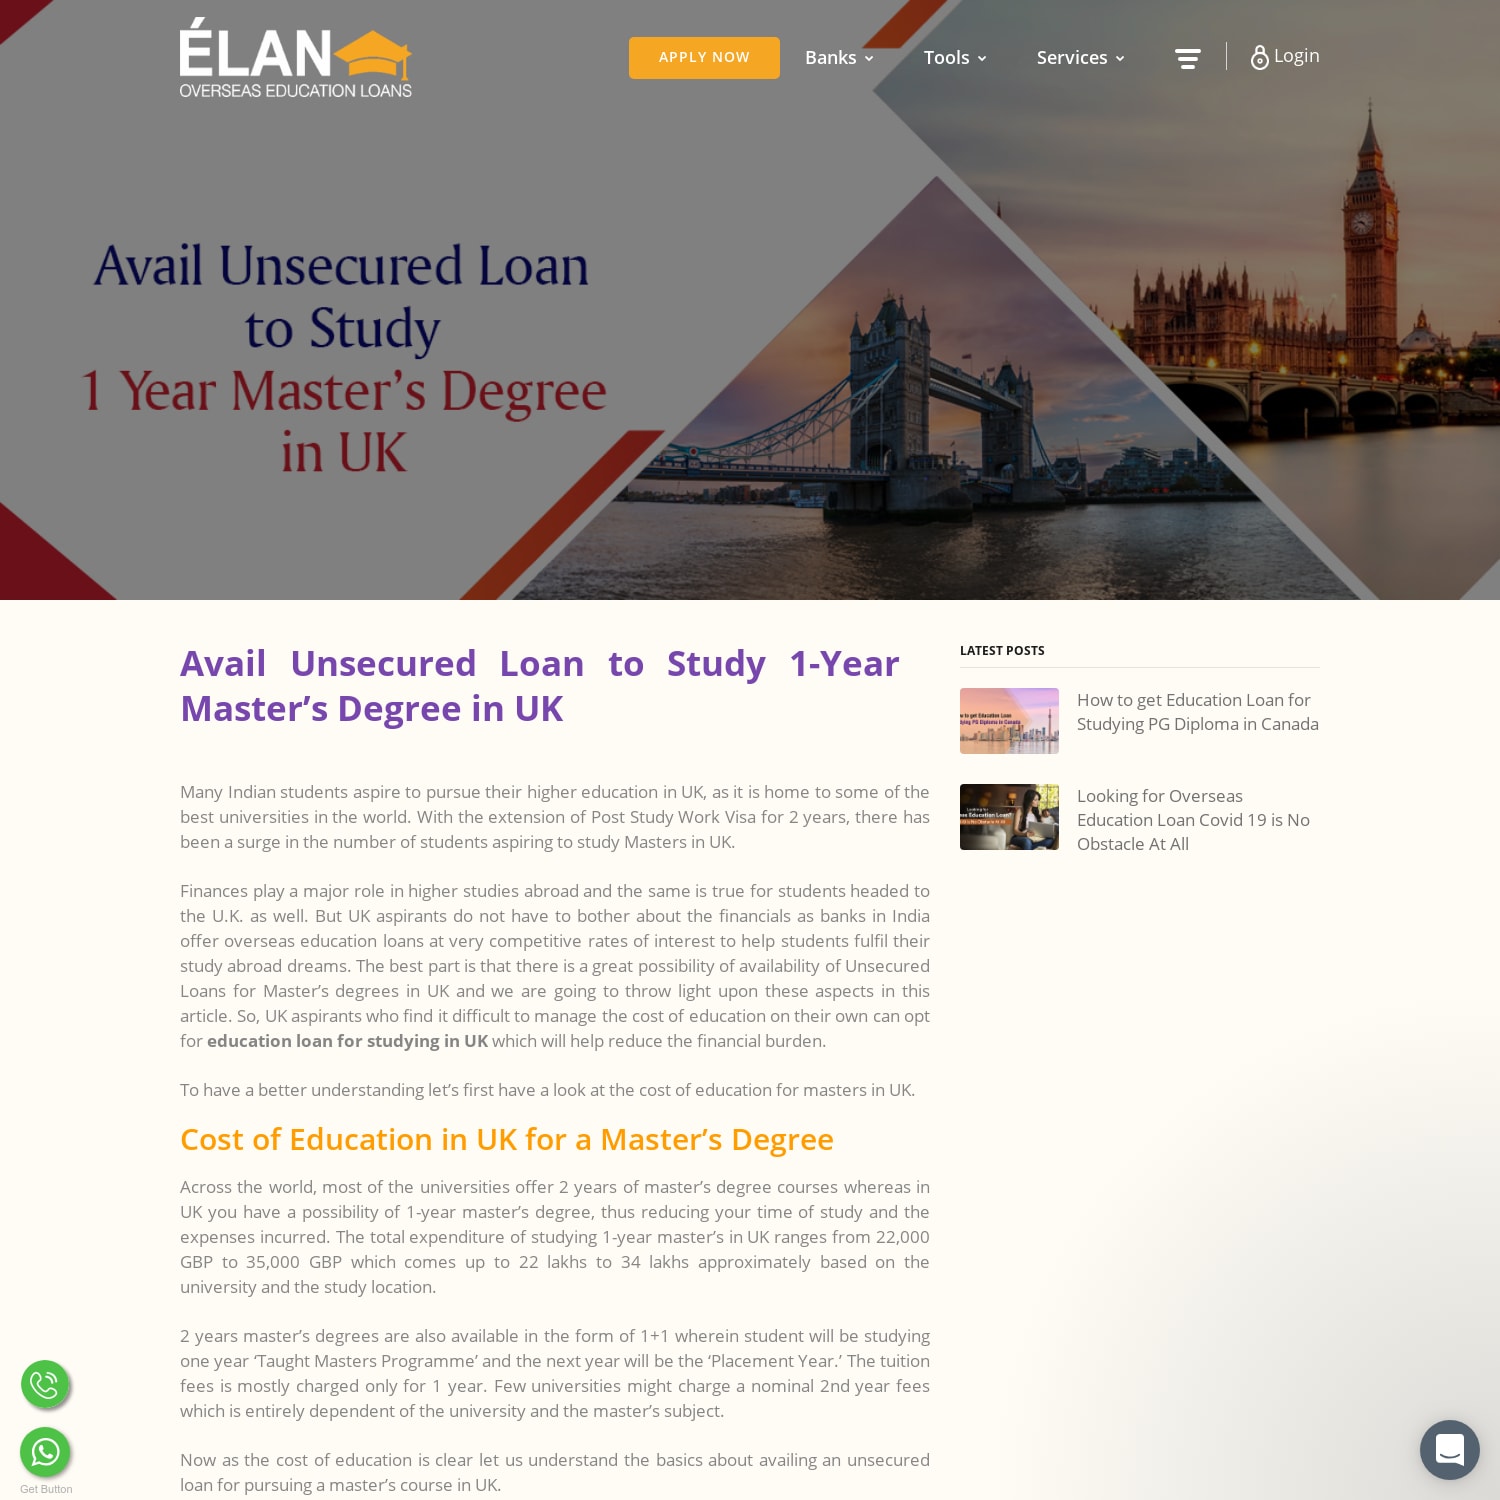 Education loan for Studying in UK- Unsecured Loan for 1-Year Masters